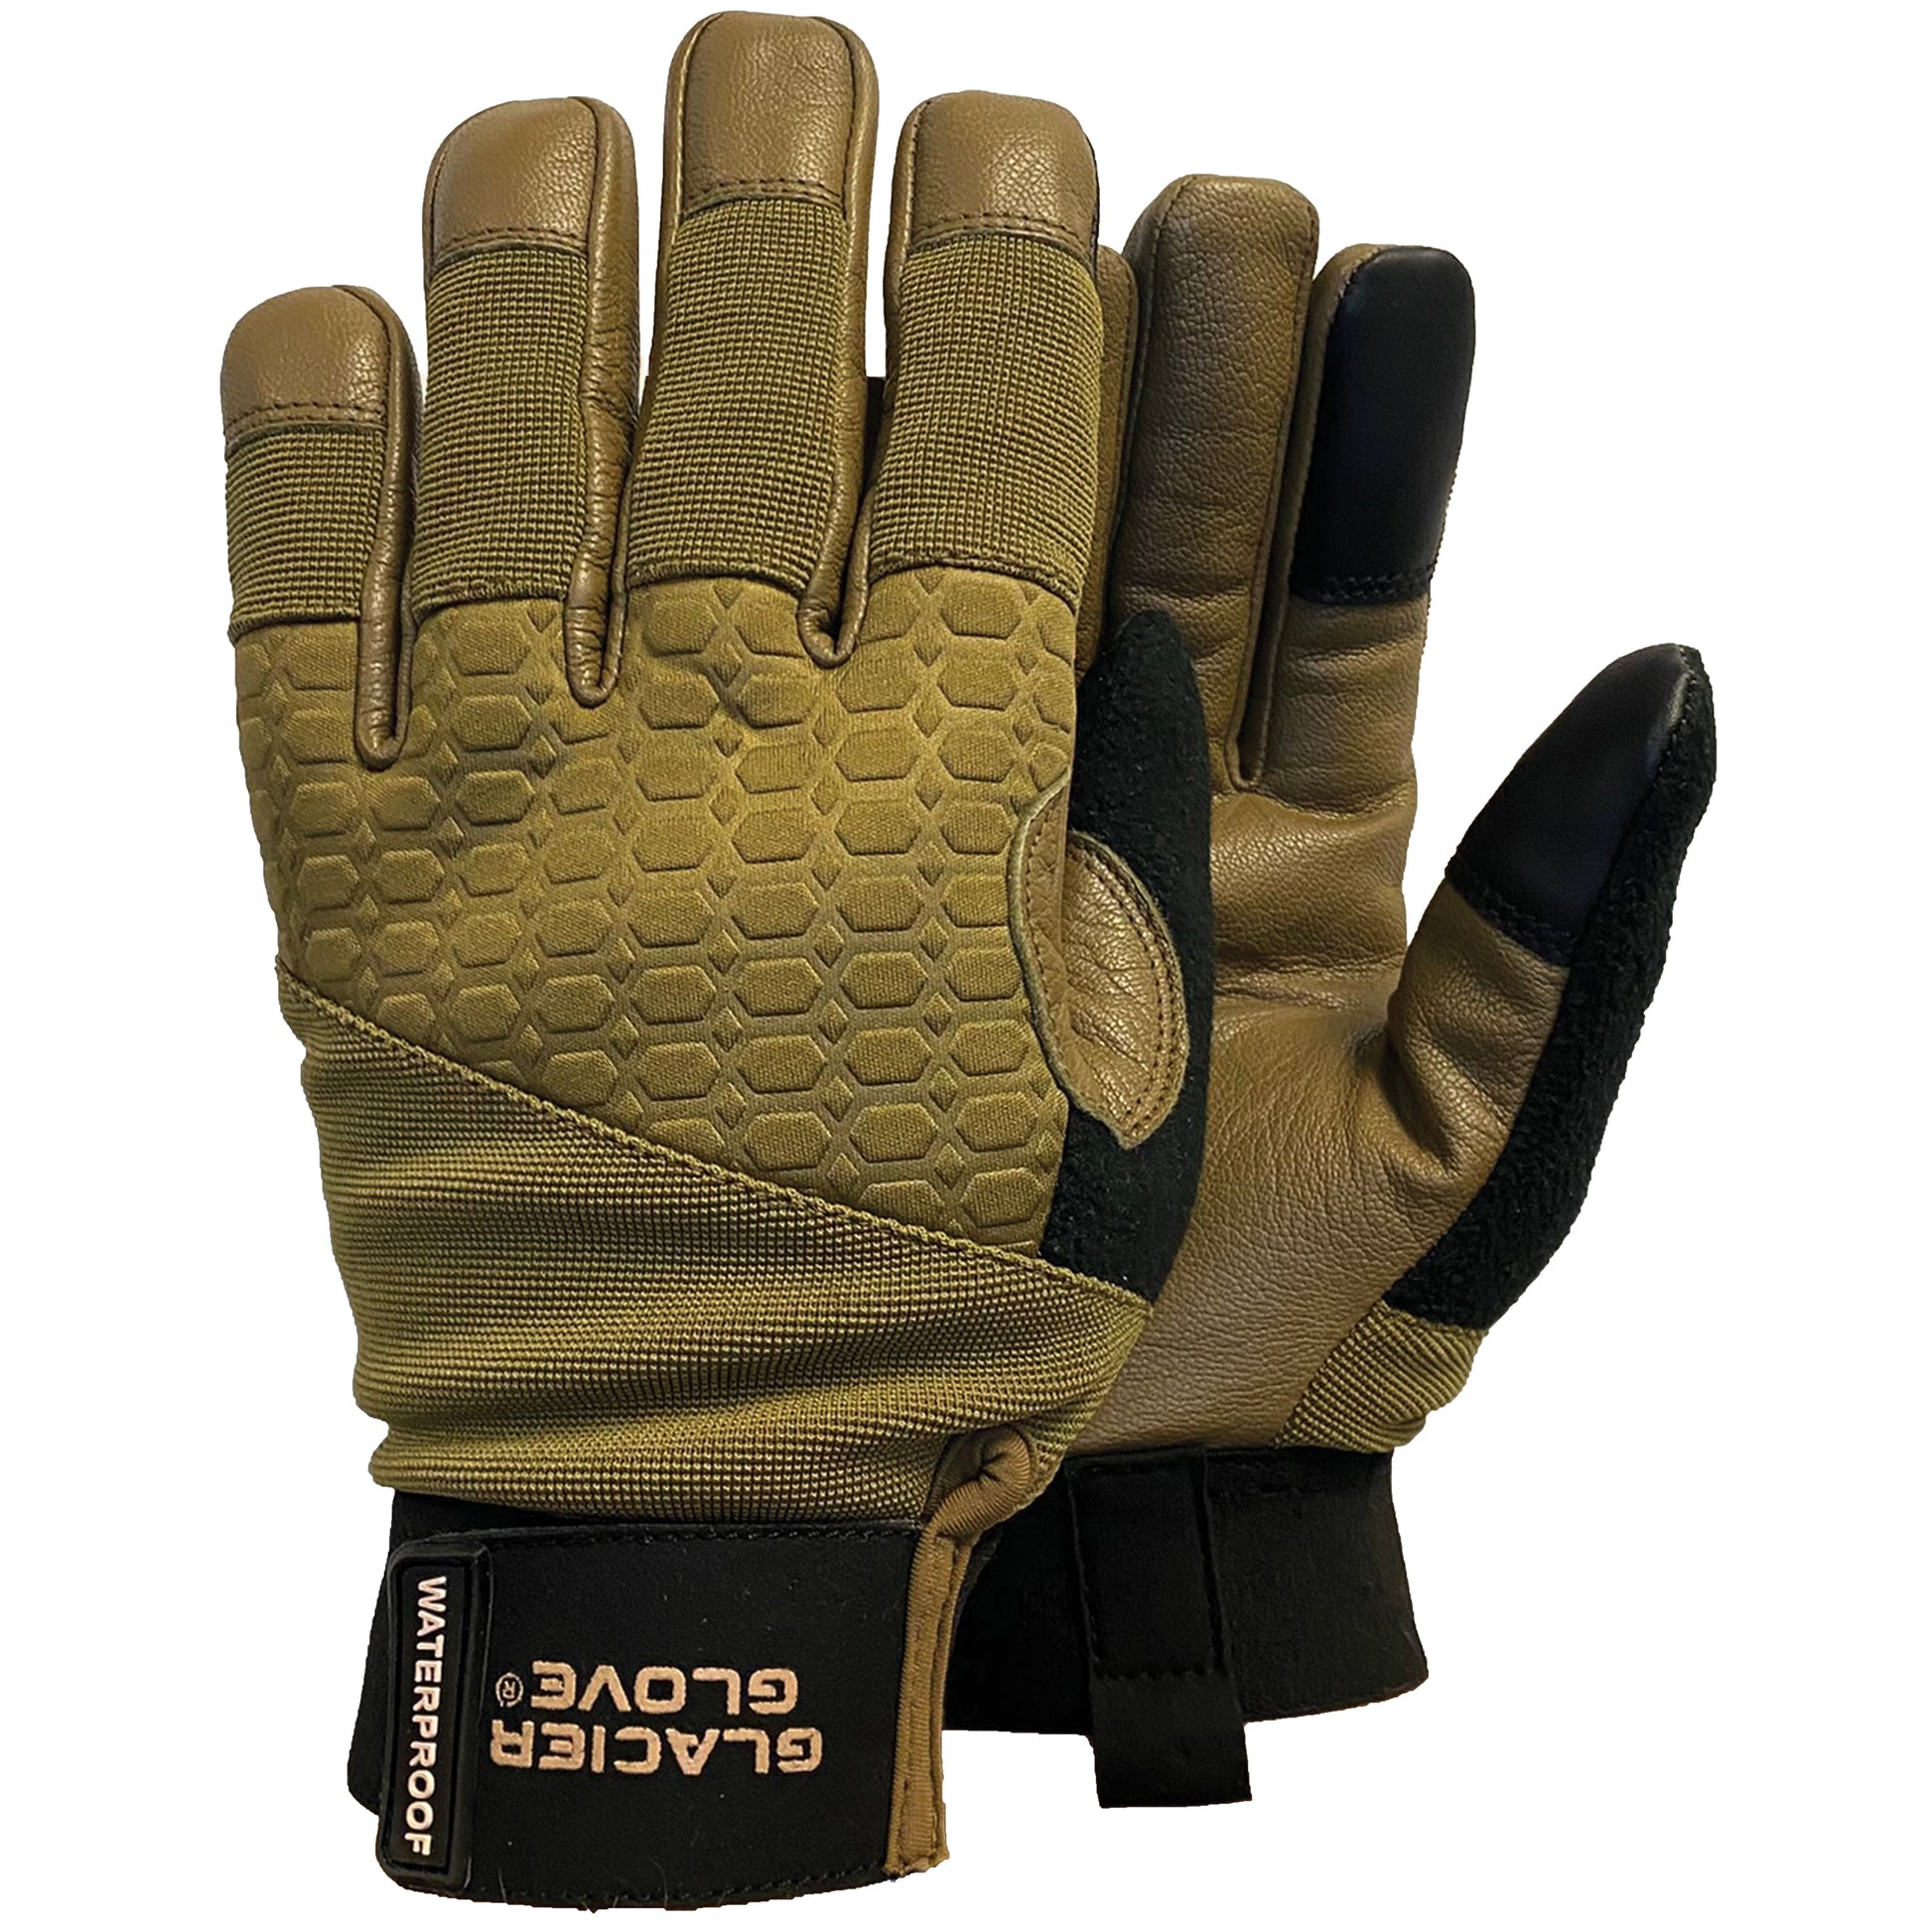 The popular Alaska Pro Series has been redesigned with a focus on warmth and dexterity. Blending the feel of a shooting glove with the warmth of a winter glove, the Alaska Pro is sure to be your favorite cold weather glove.